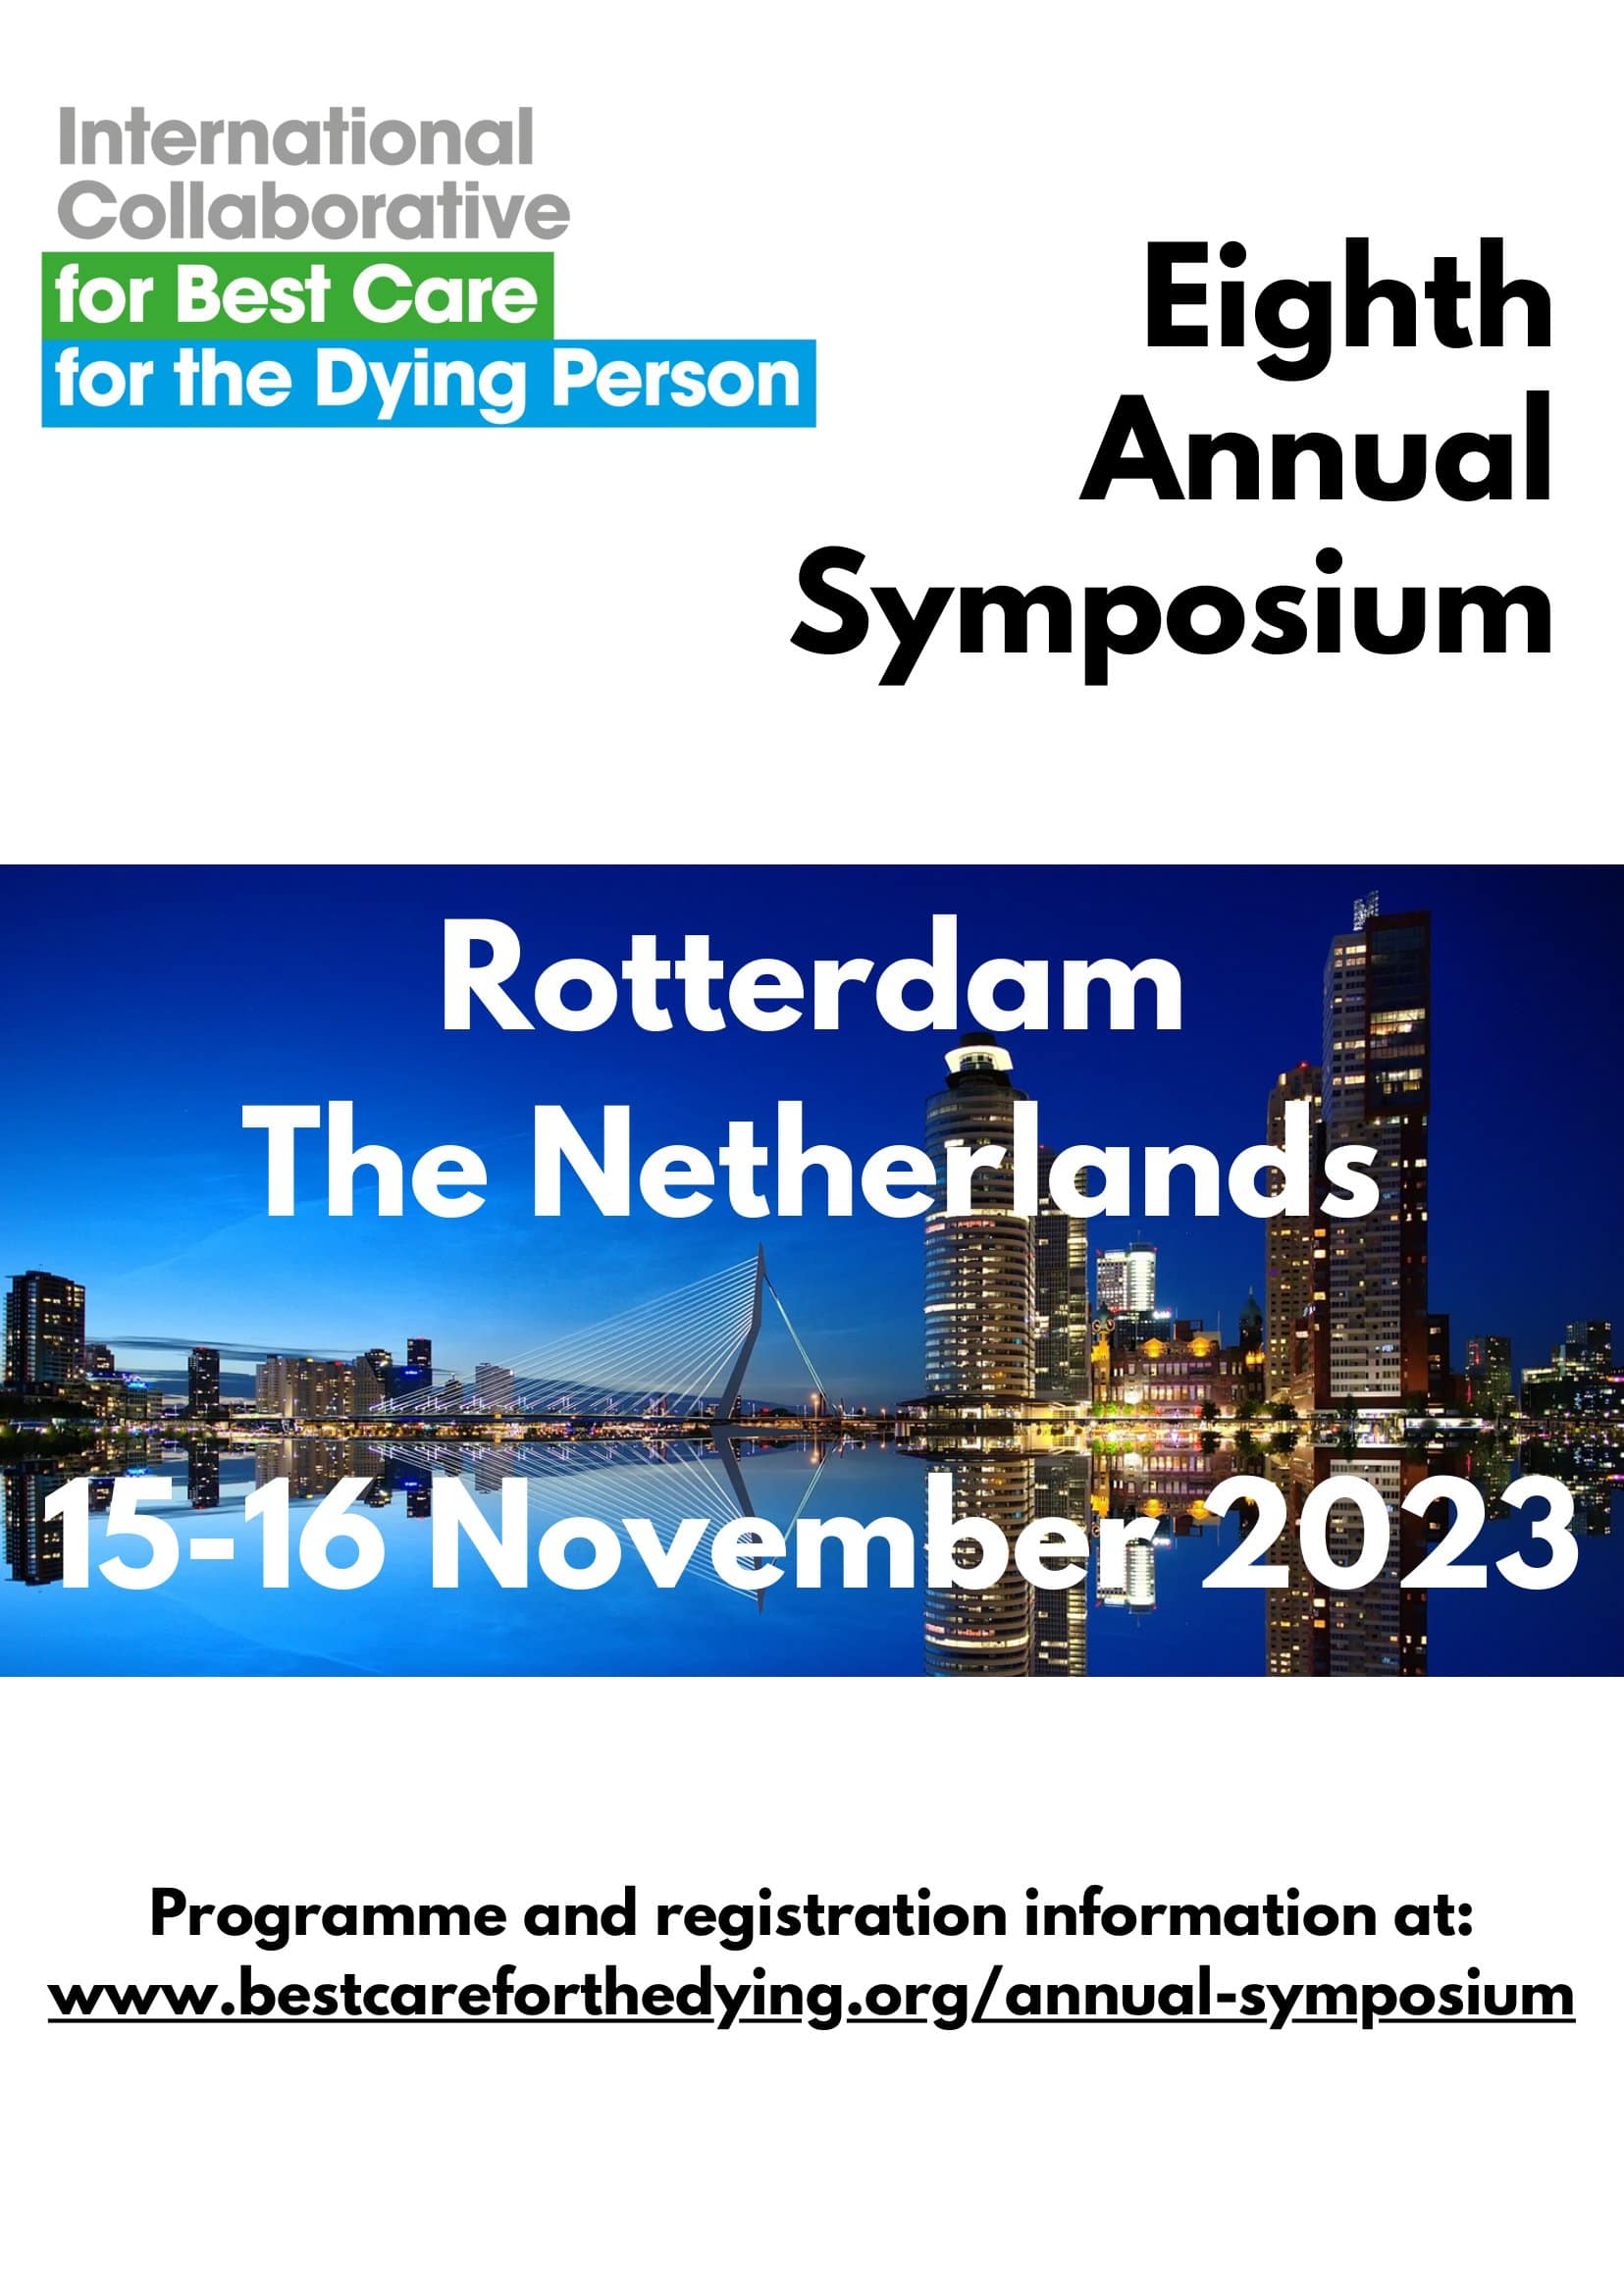 International Collaborative for Best Care for the Dying Person: Eight Annual Symposium